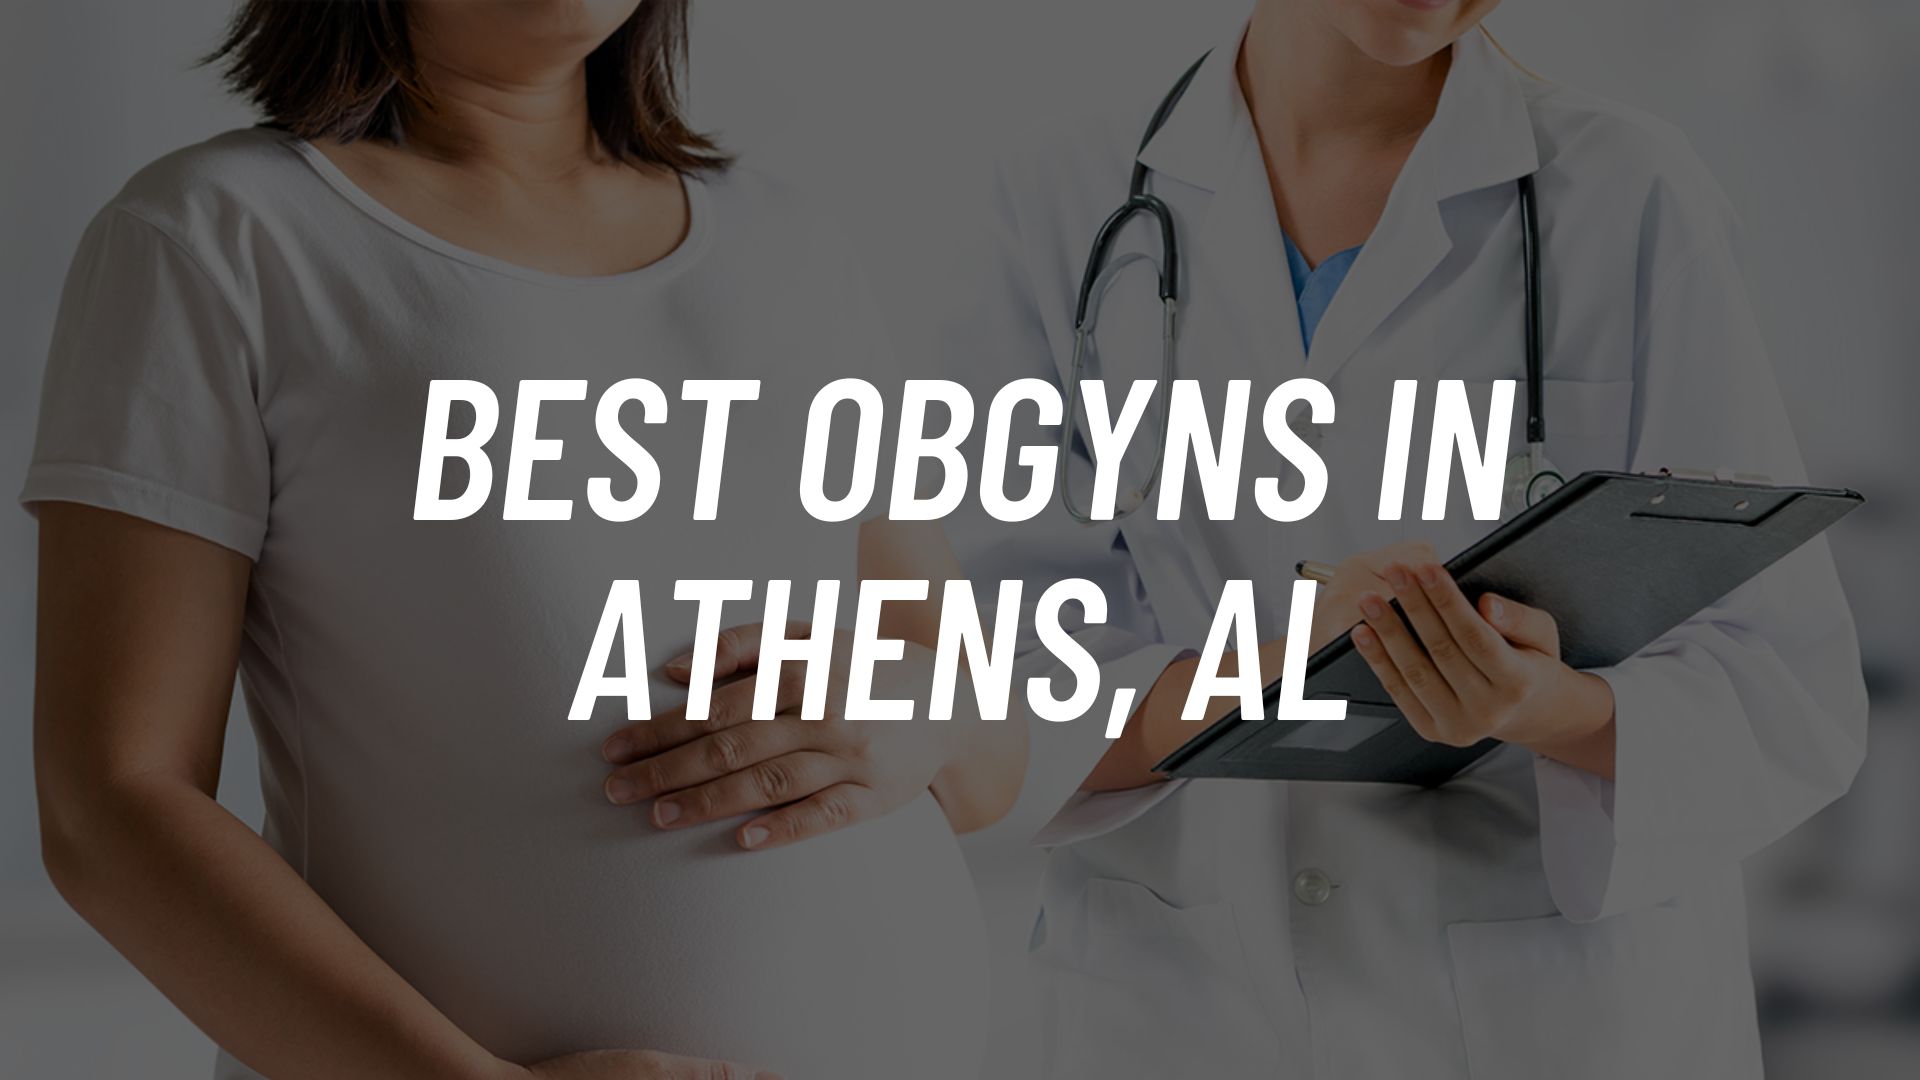 Best OBGYNs in Athens, AL